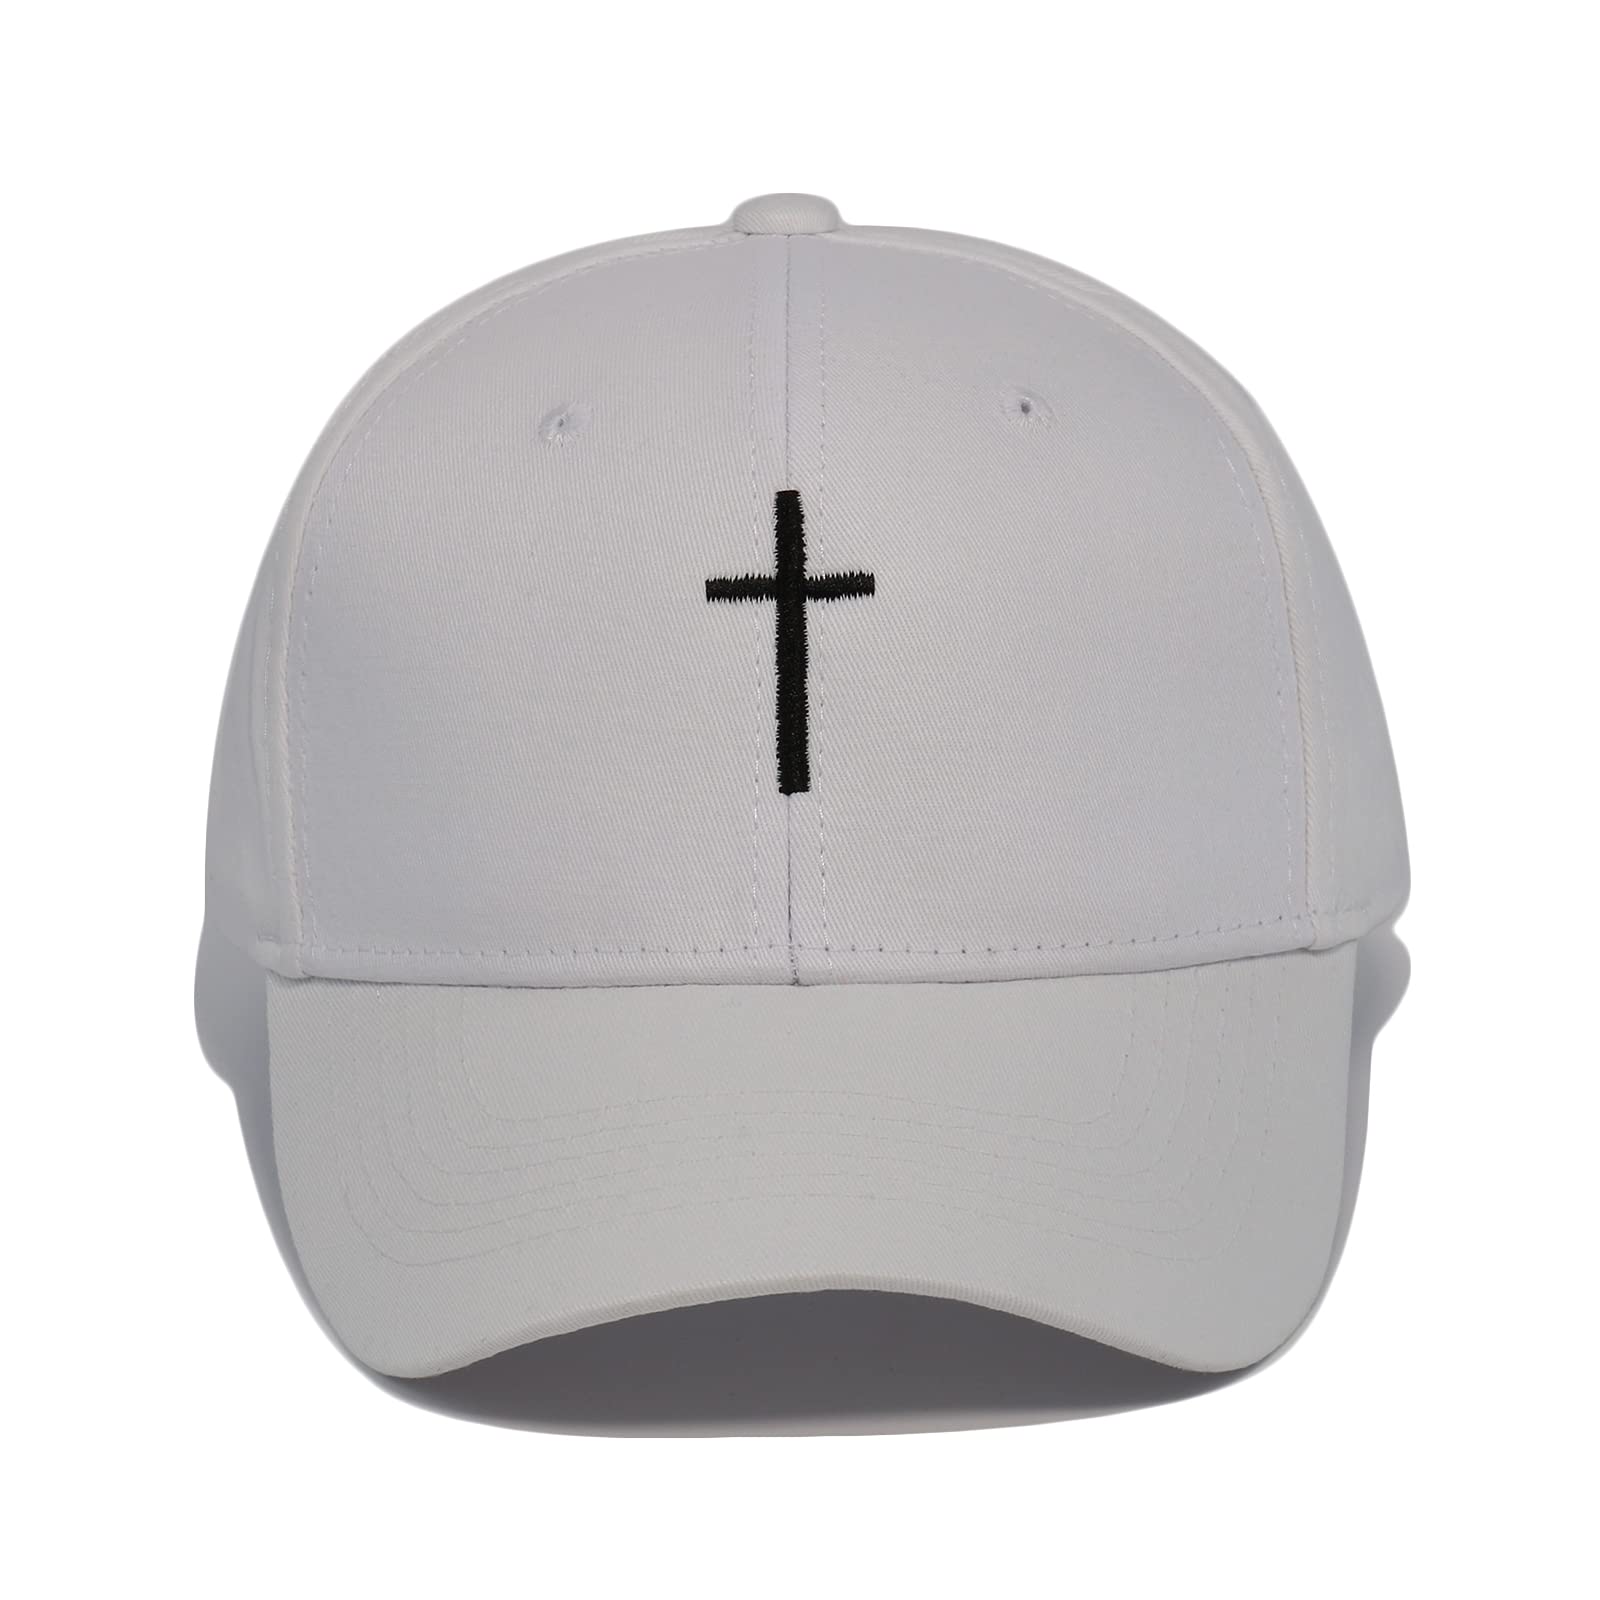 Cross Embroidery Baseball Cap,Adjustable Structured Dad Hat for Men Women Sun Hat (White-1)